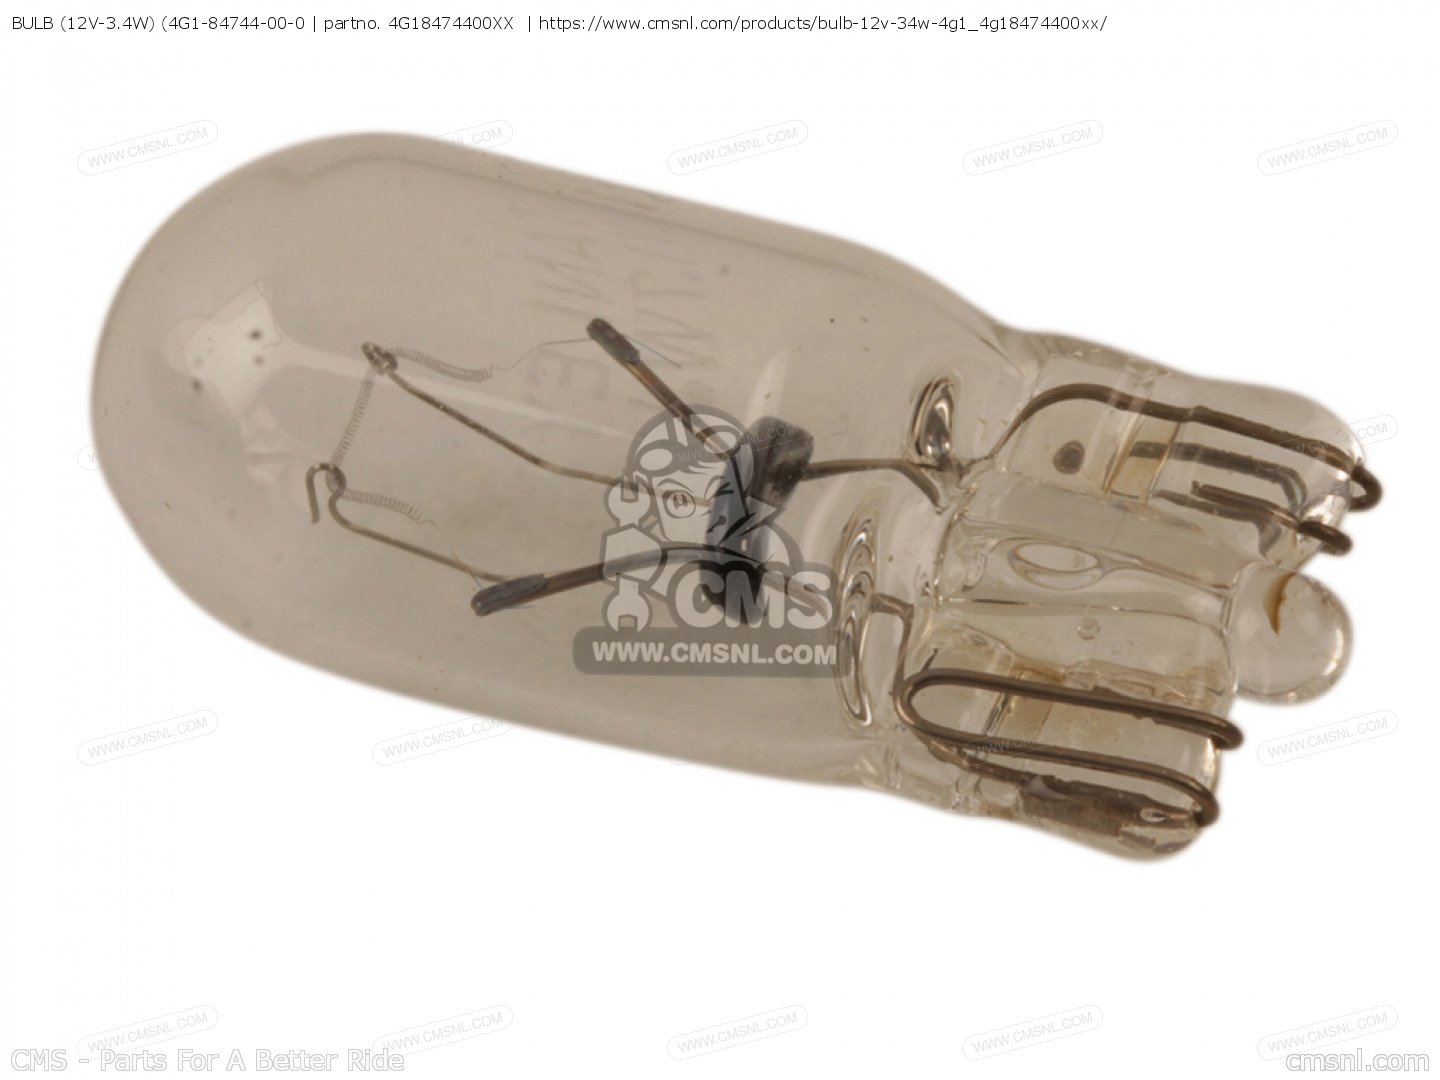 Industrial Sewing Machine Replacement Light Bulbs - WAWAK Sewing Supplies